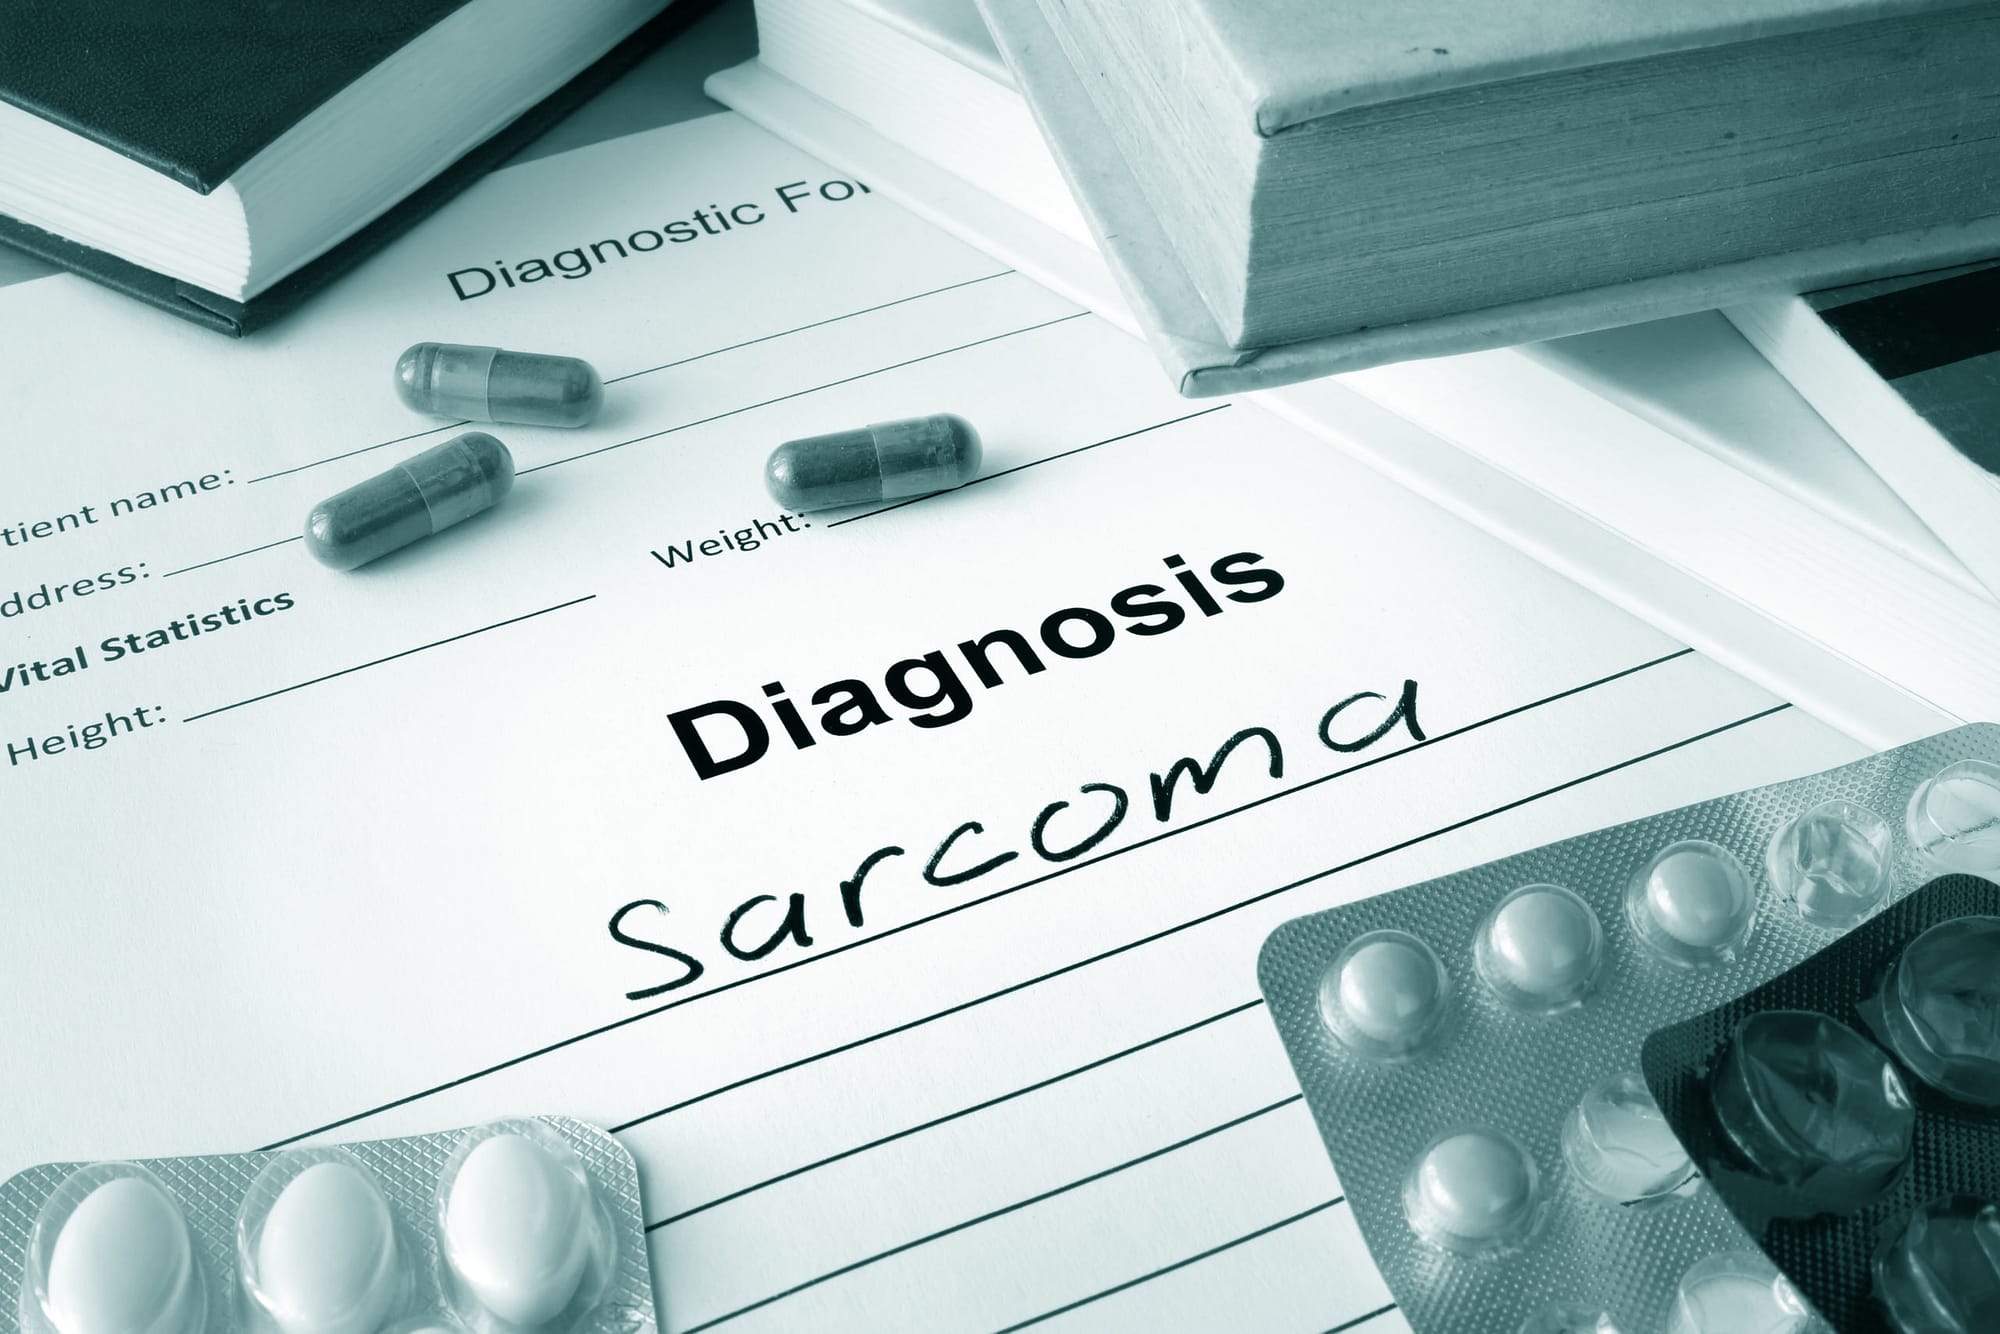 Diagnostic form with diagnosis sarcoma and pills.